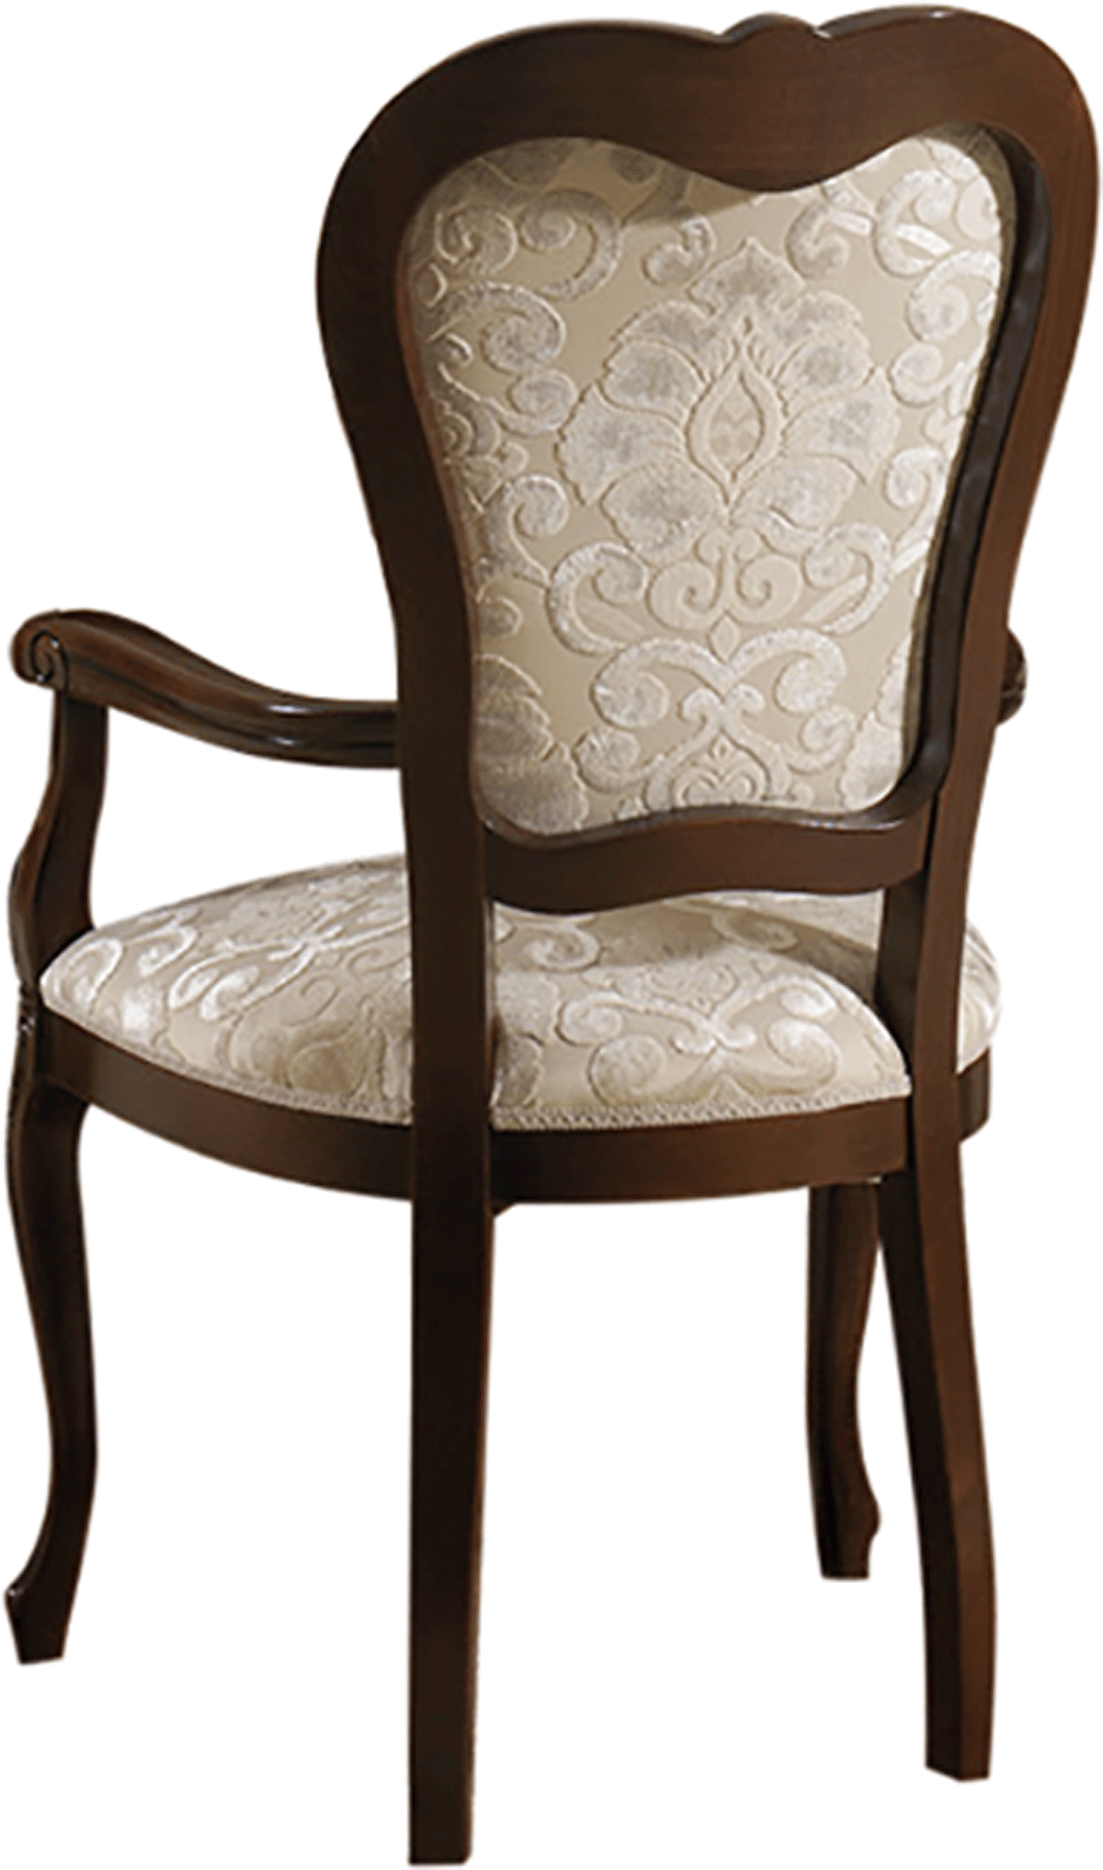 Dining Room Furniture Tables Donatello Armchair